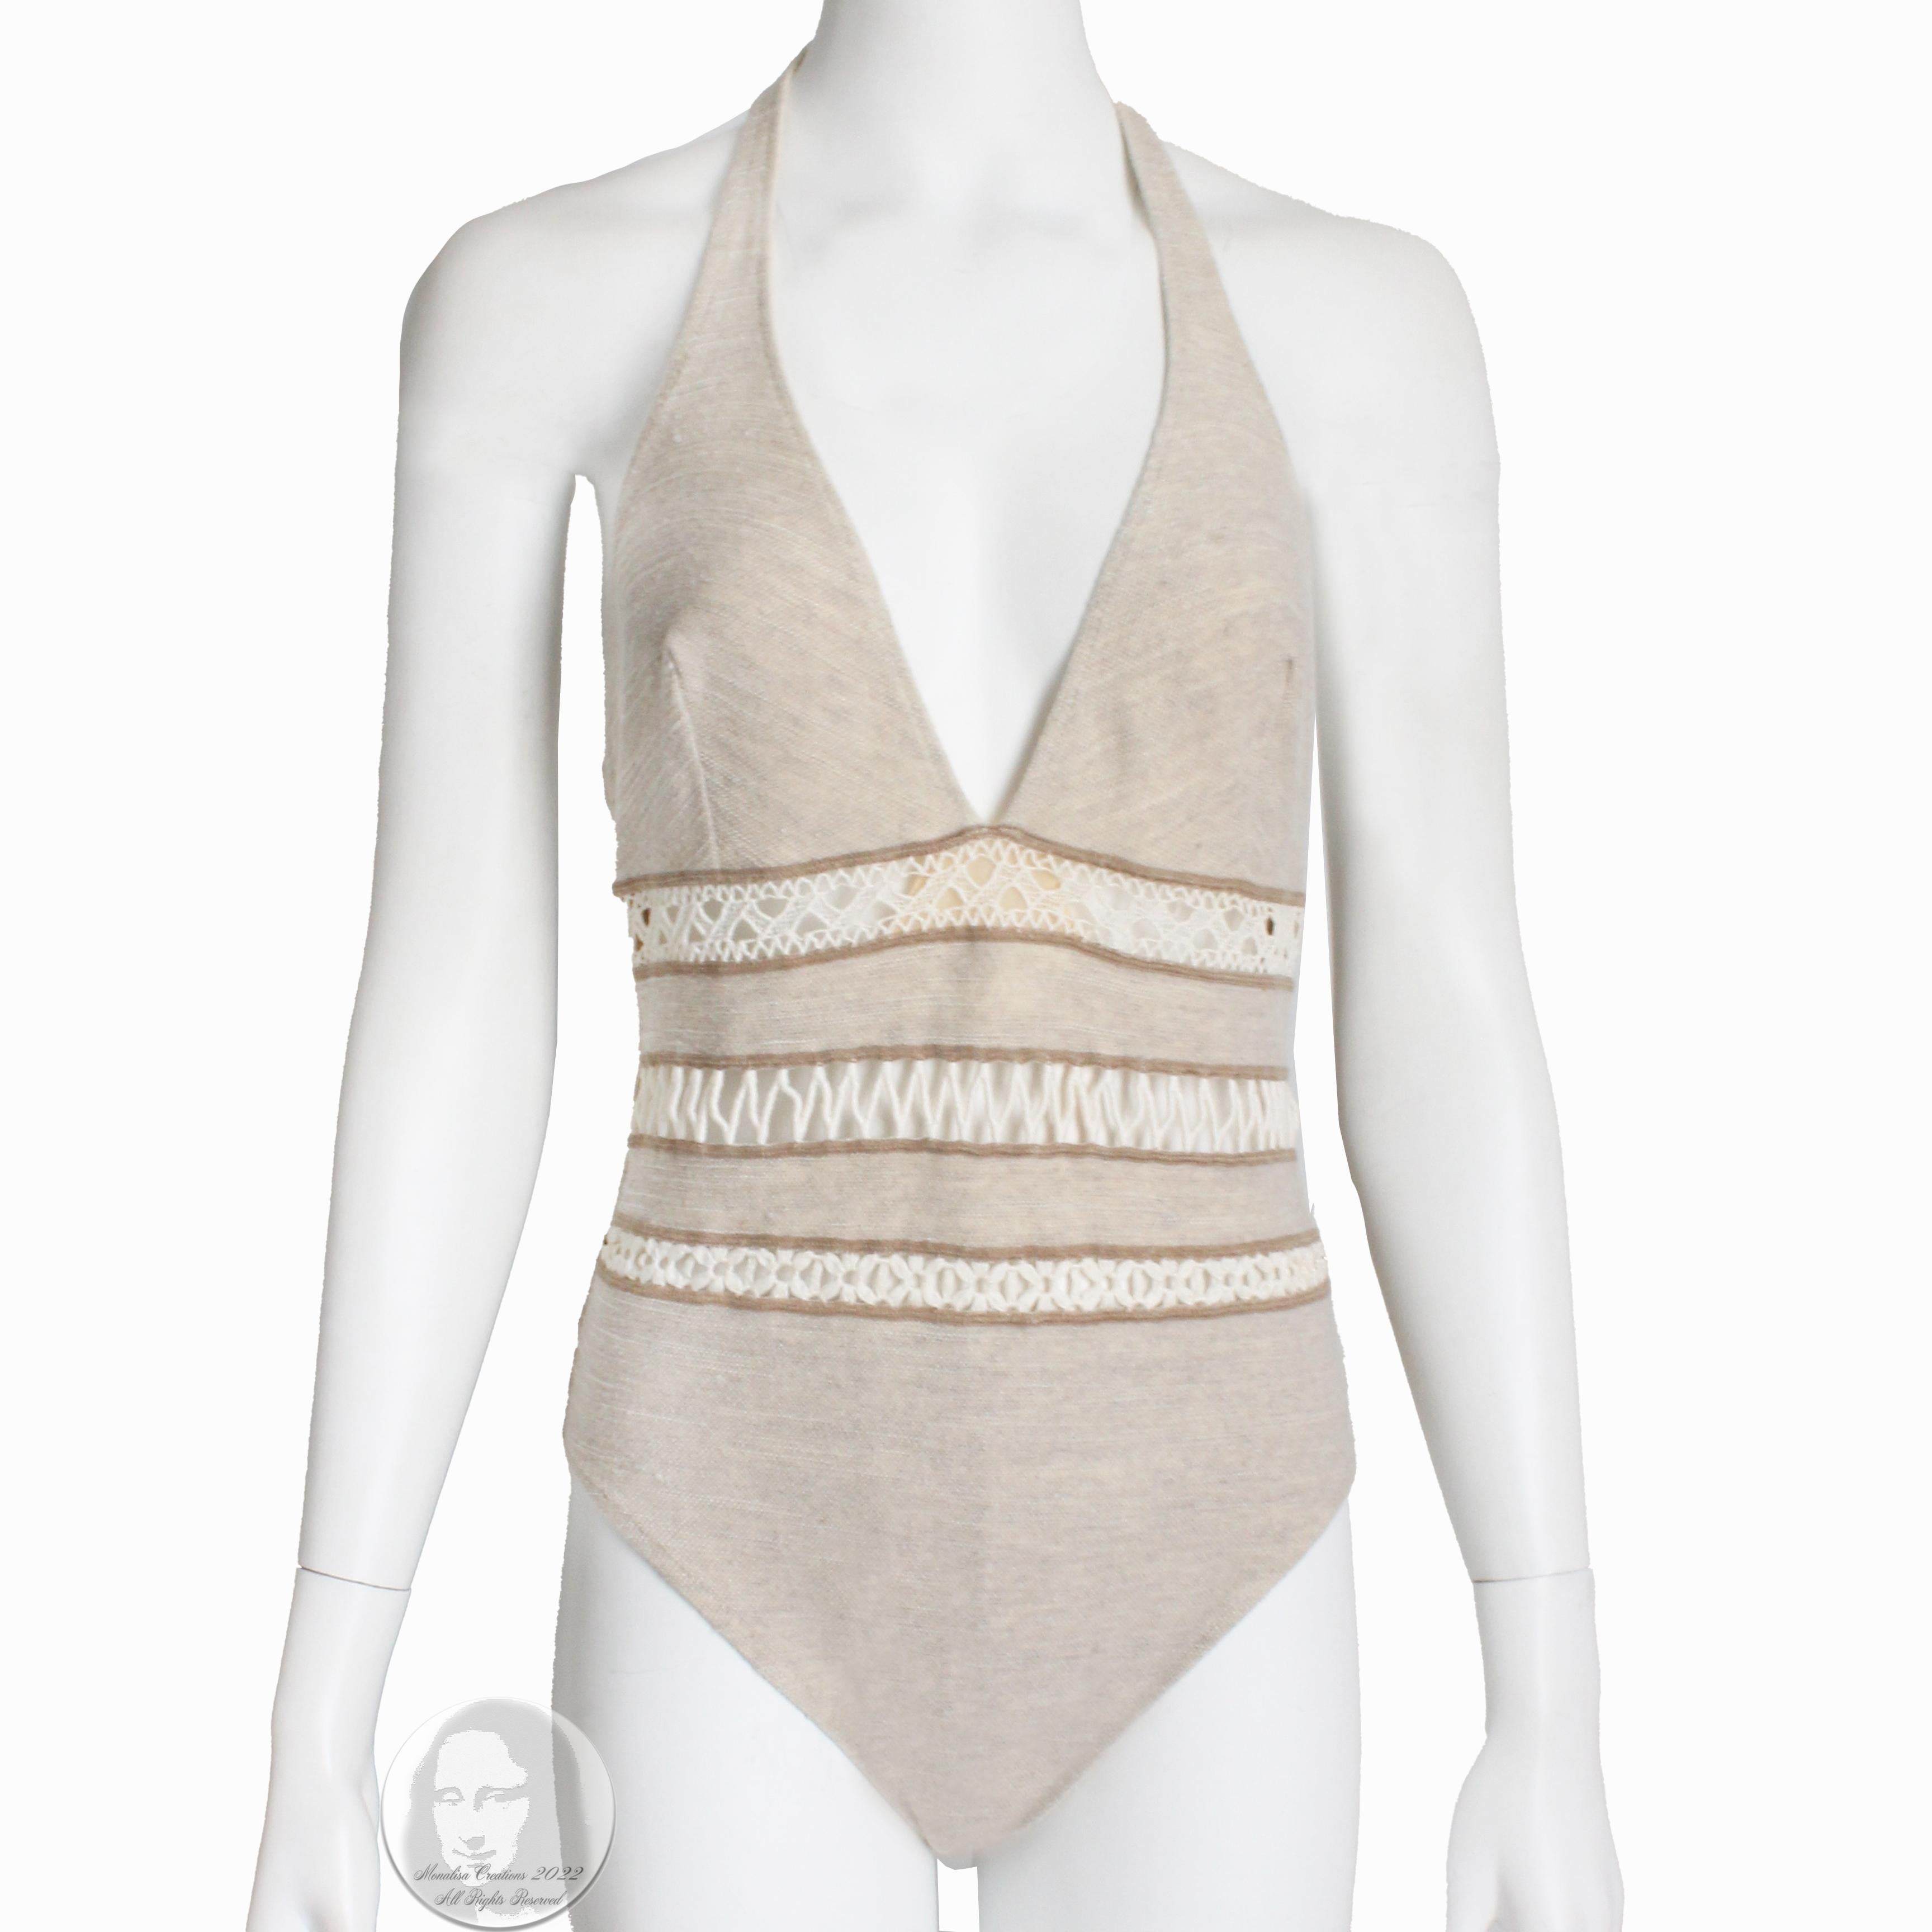 Preowned La Perla body suit or swim suit with halter top, likely made in the 2000s.  Made from a taupe-hued linen/cotton/acrylic/silk blend fabric, it features macrame inserts and a halter tie fastener.  A fabulous piece that's easy to wear and